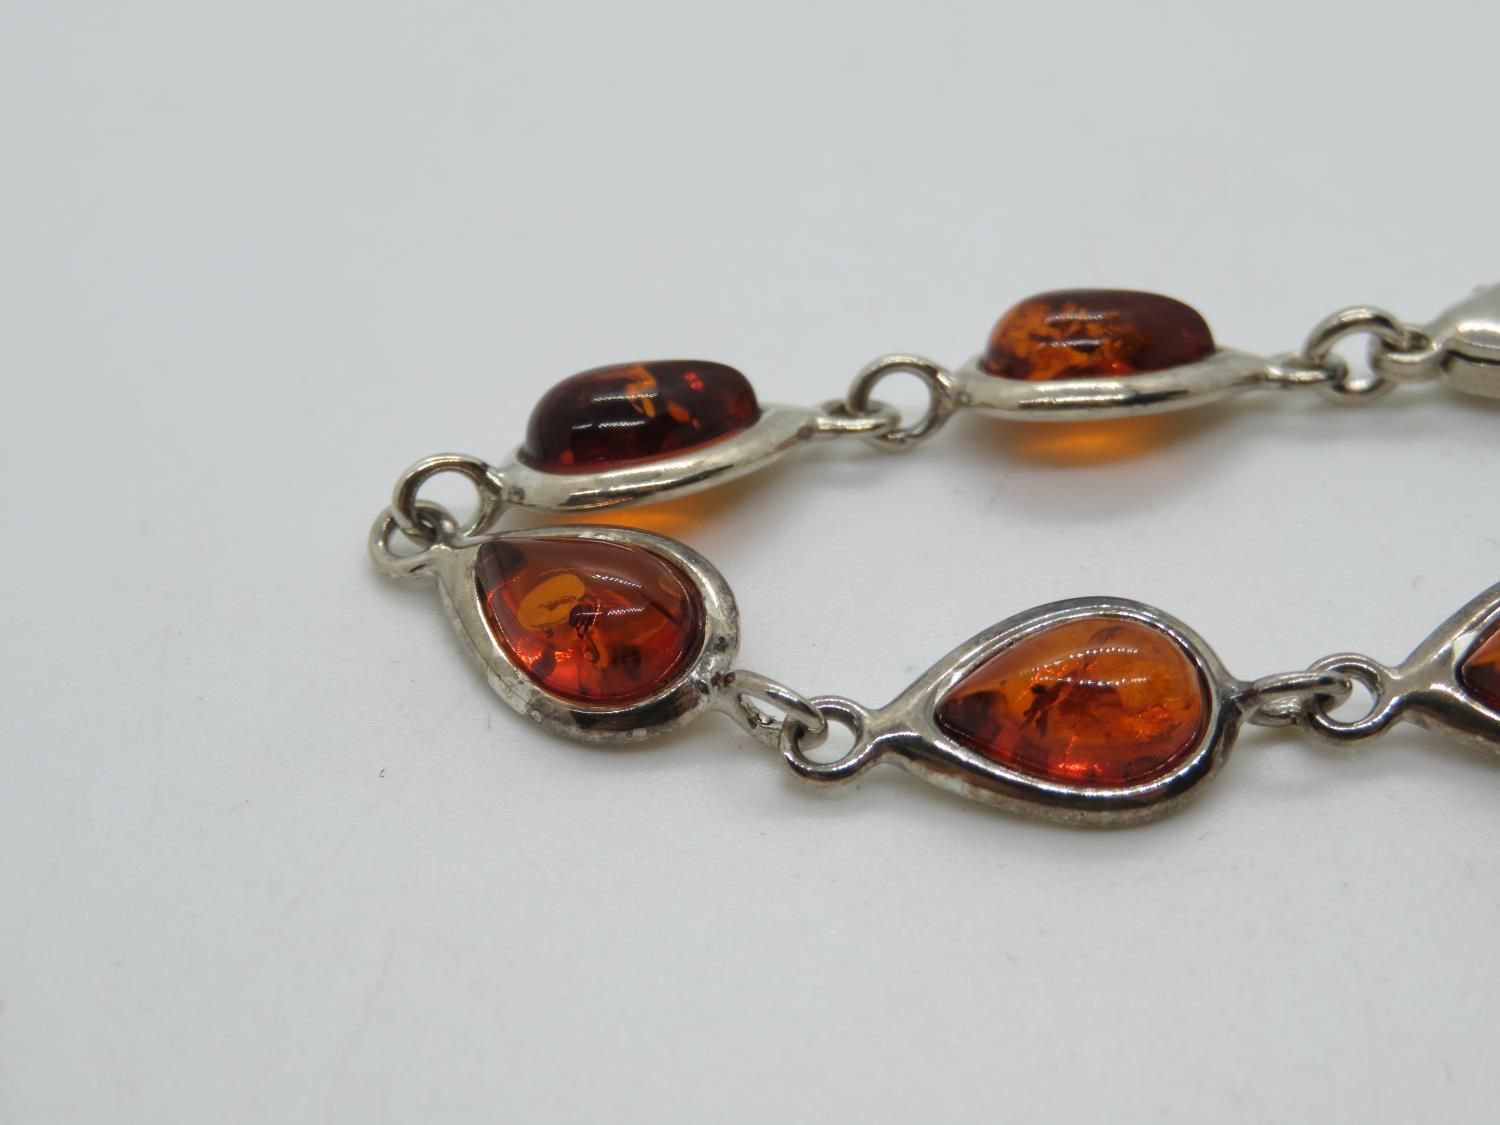 HM silver bracelet 7.75" set with baltic amber 8.8g - Image 2 of 2